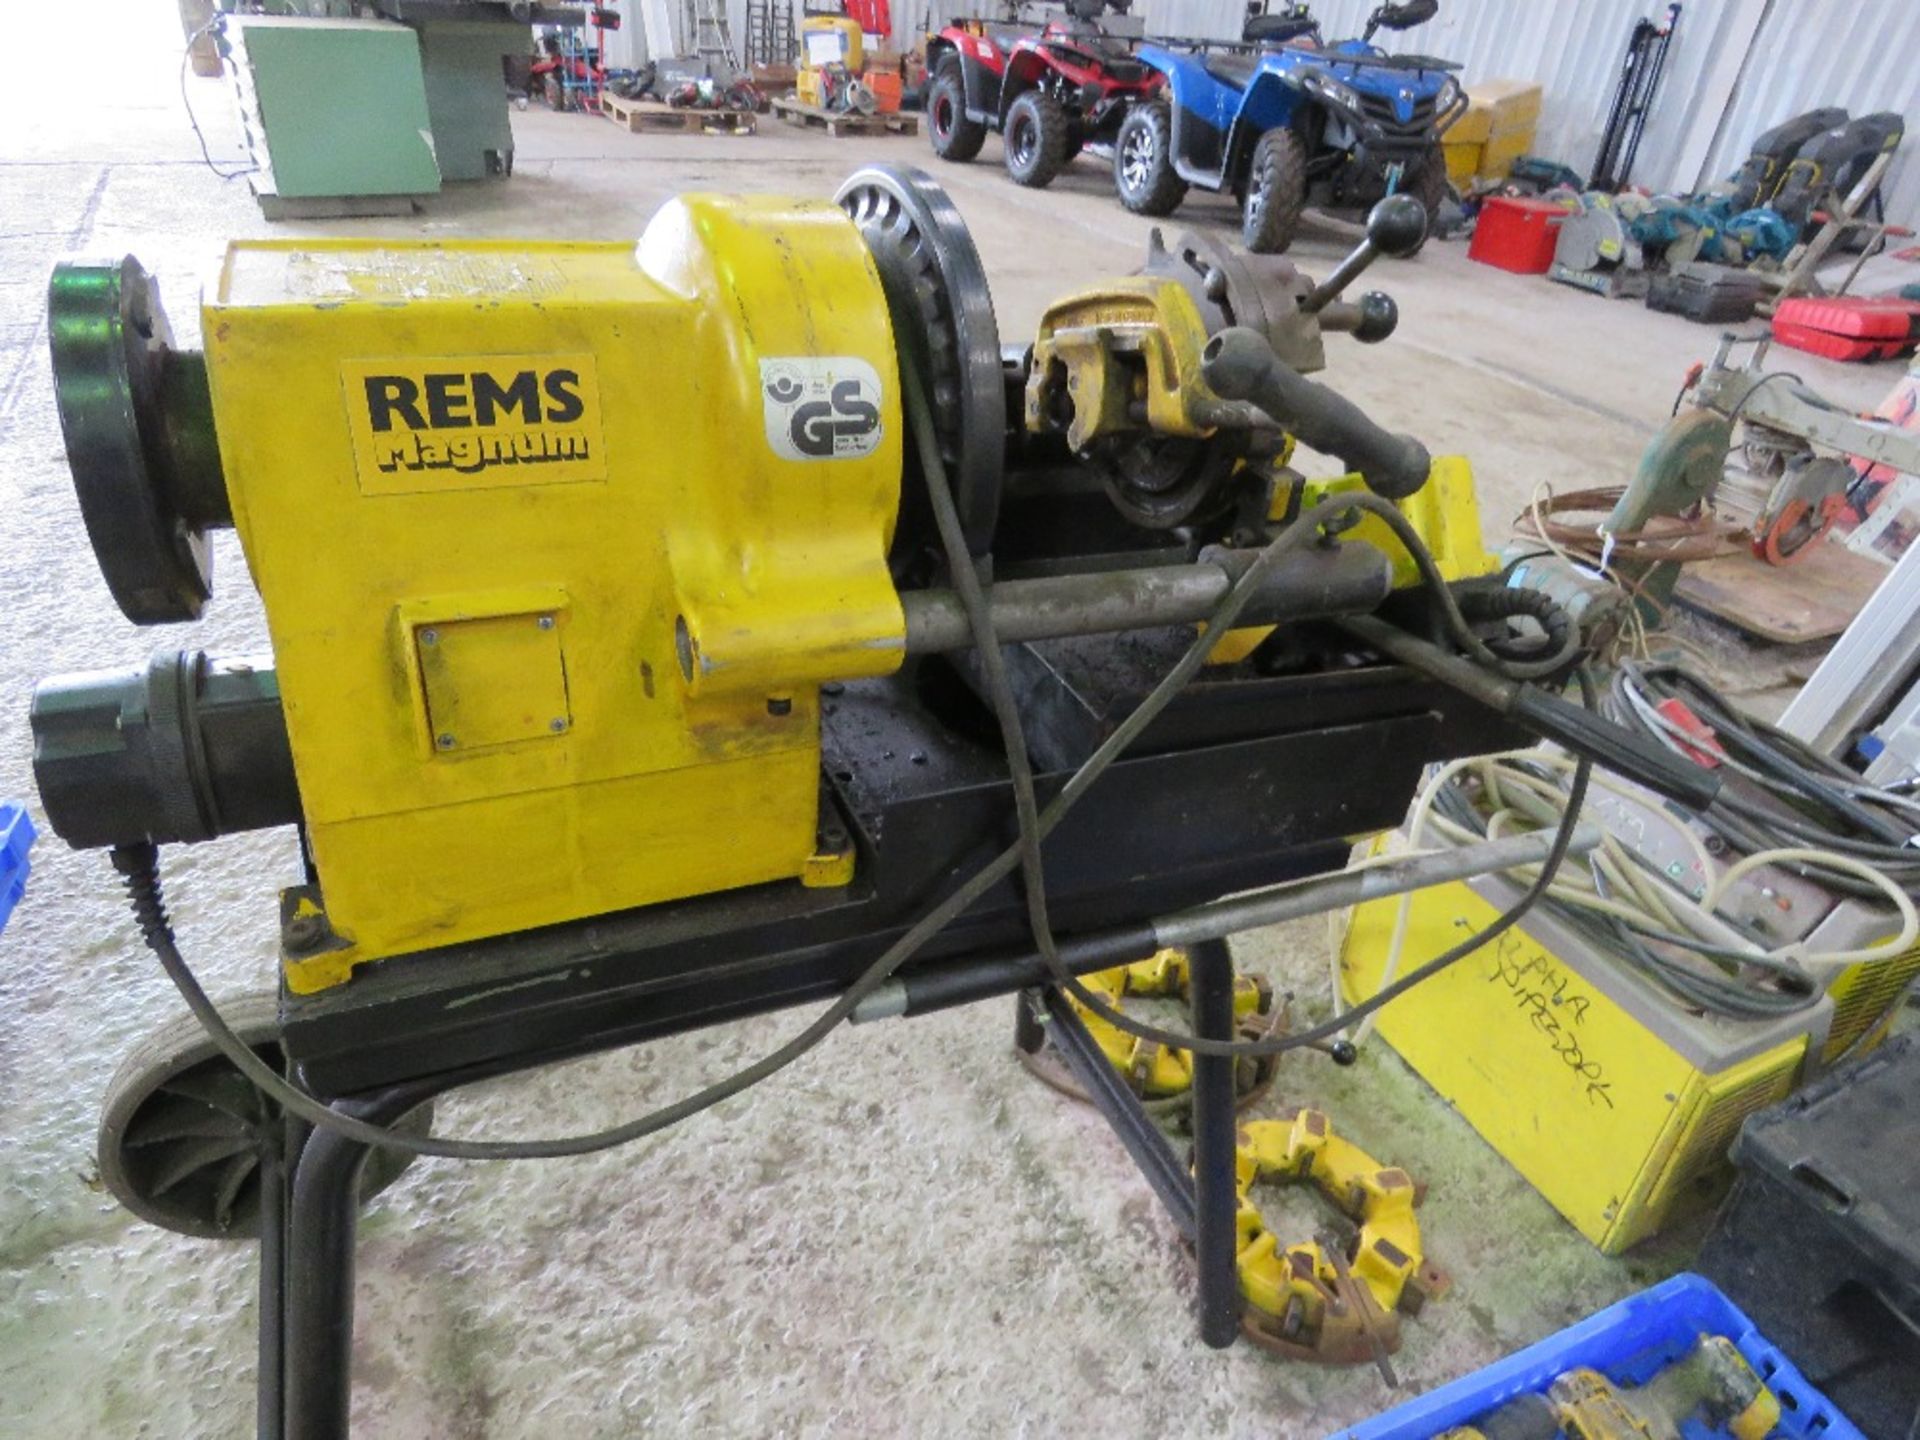 REMS 2000 PIPE THREADING STATION WITH 3 X HEADS. 110VOLT POWERED, SURPLUS TO REQUIREMENTS/LAZY ASSET - Image 4 of 5